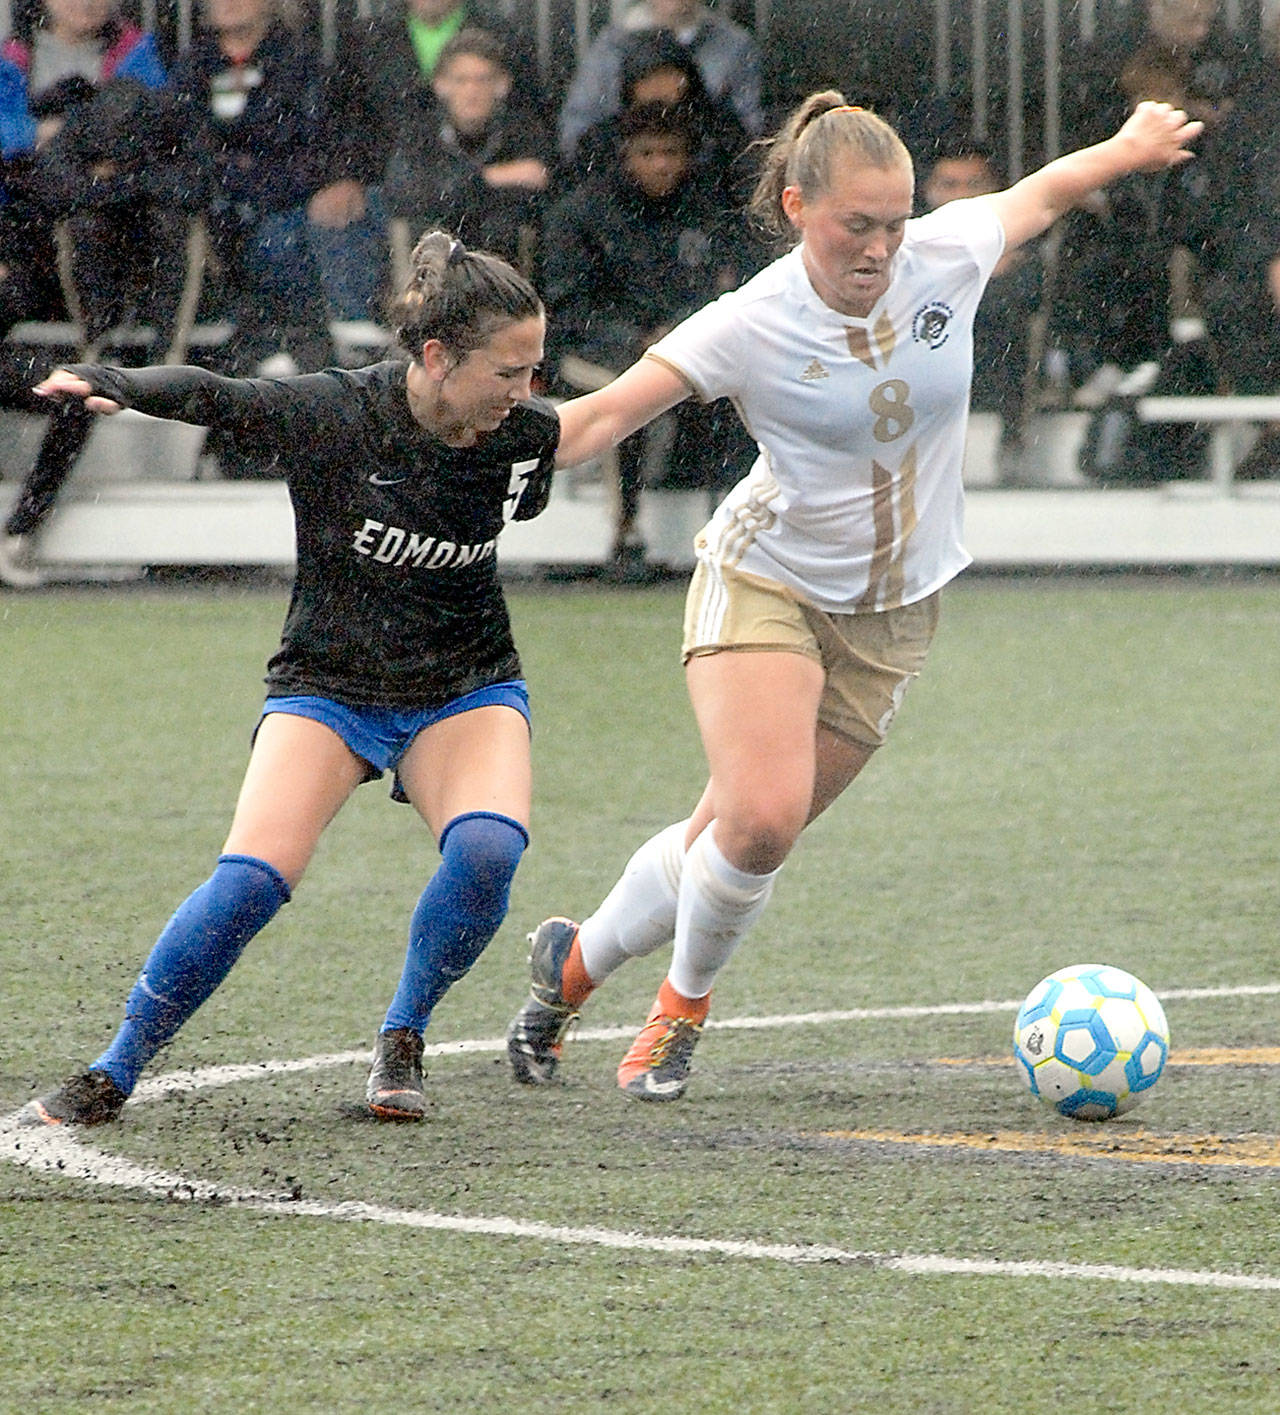 Keith Thorpe/Peninsula Daily News Edmonds’ Katlyn Ewoniuk, left, and Peninsula’s Emilee Greve battle for the ball during Saturday’s match in Port Angeles. Greve scored a goal in the match.